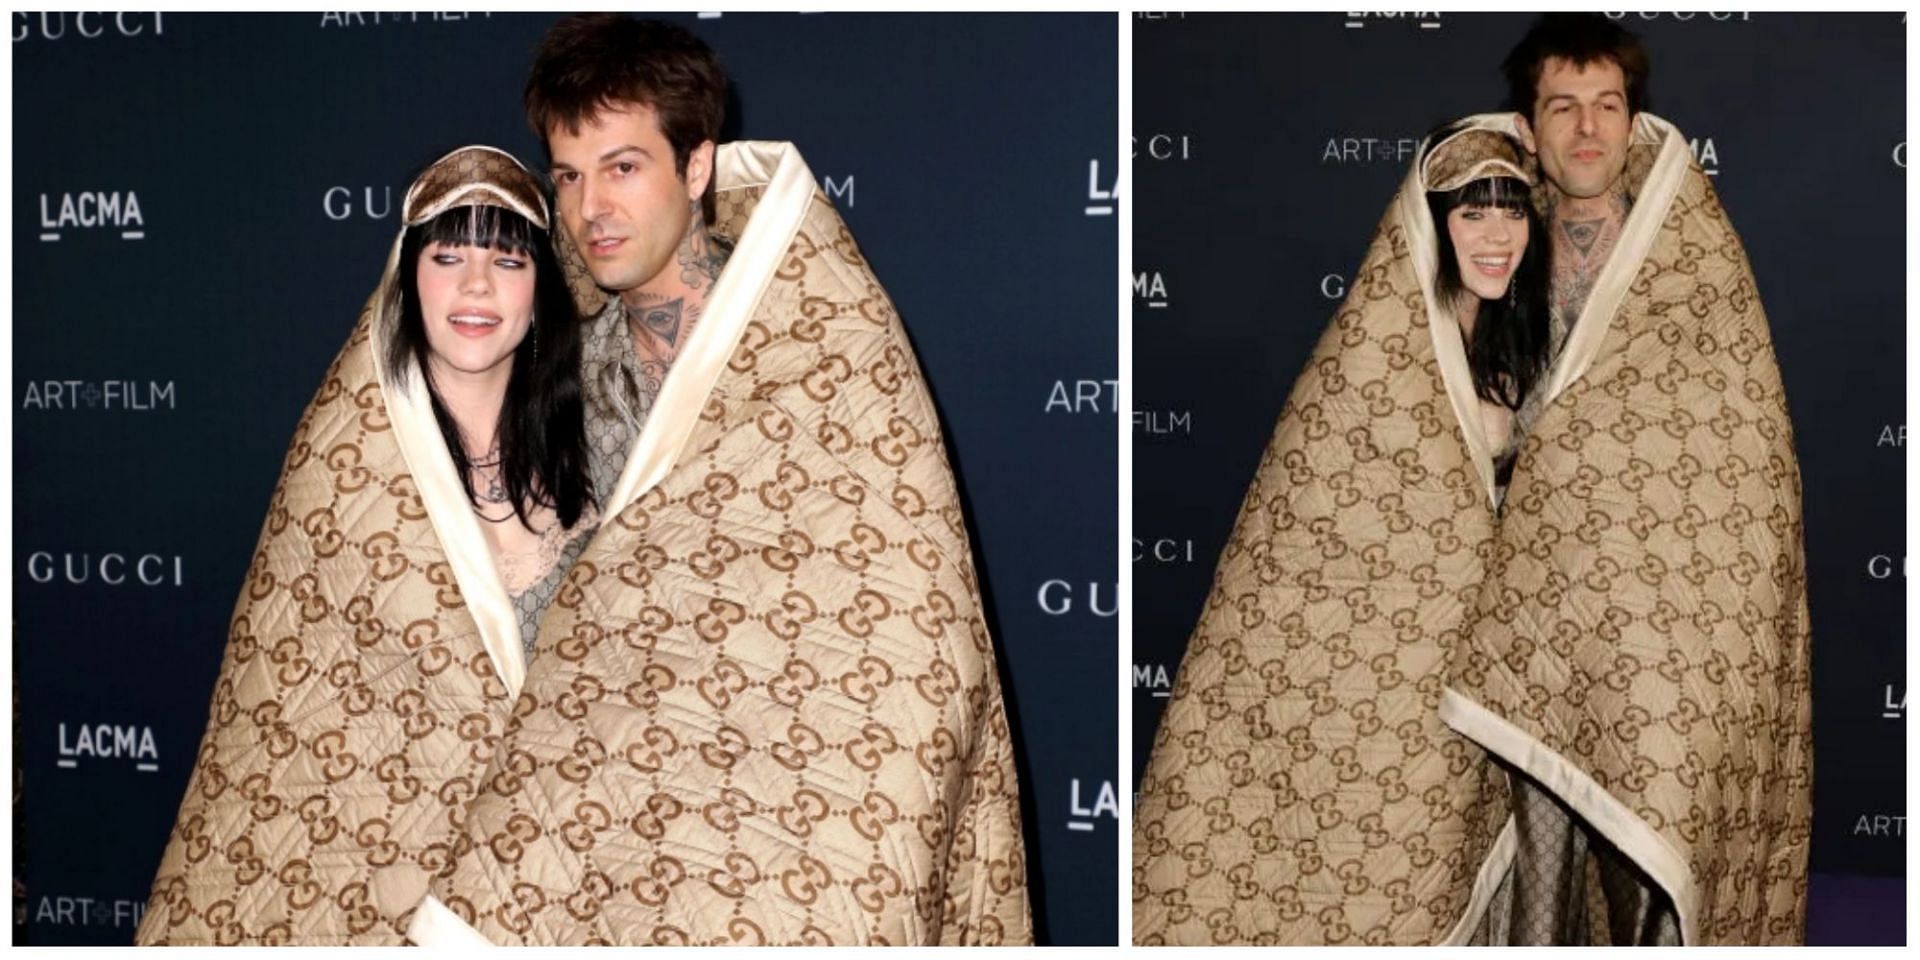 Billie and beau Jessie seen sporting all-Gucci as they make their debut red carpet appearance. (Image via Getty Images)